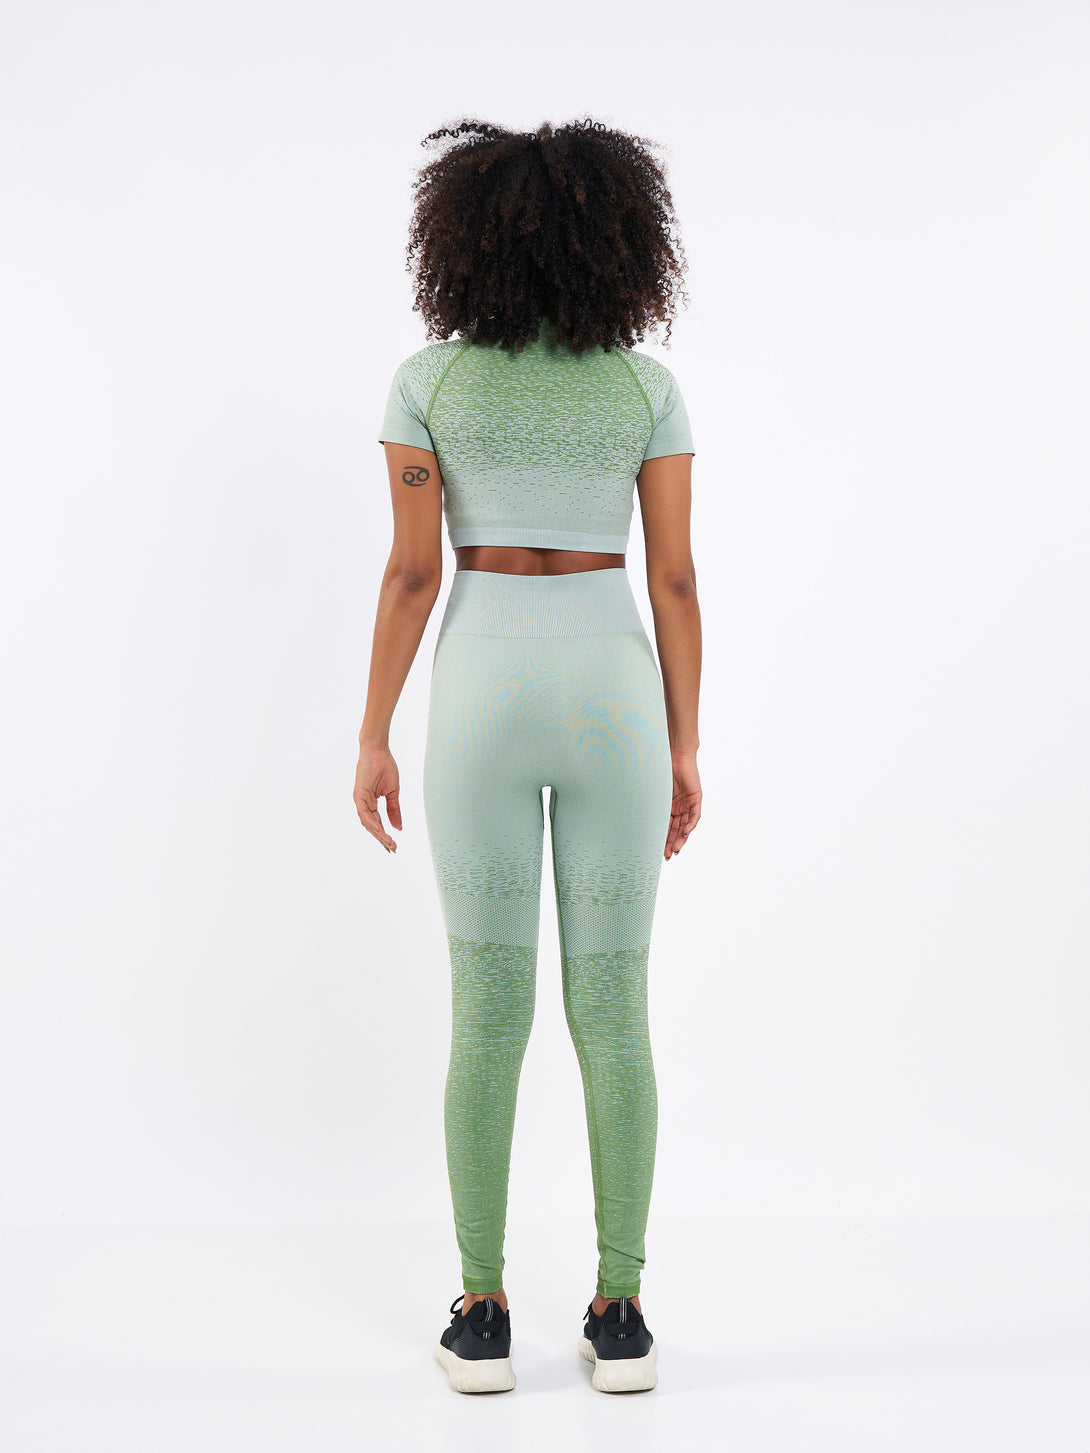 A Women Wearing Mist Green Color Seamless High-Waist Leggings with Ombre Effect. Chic Comfort